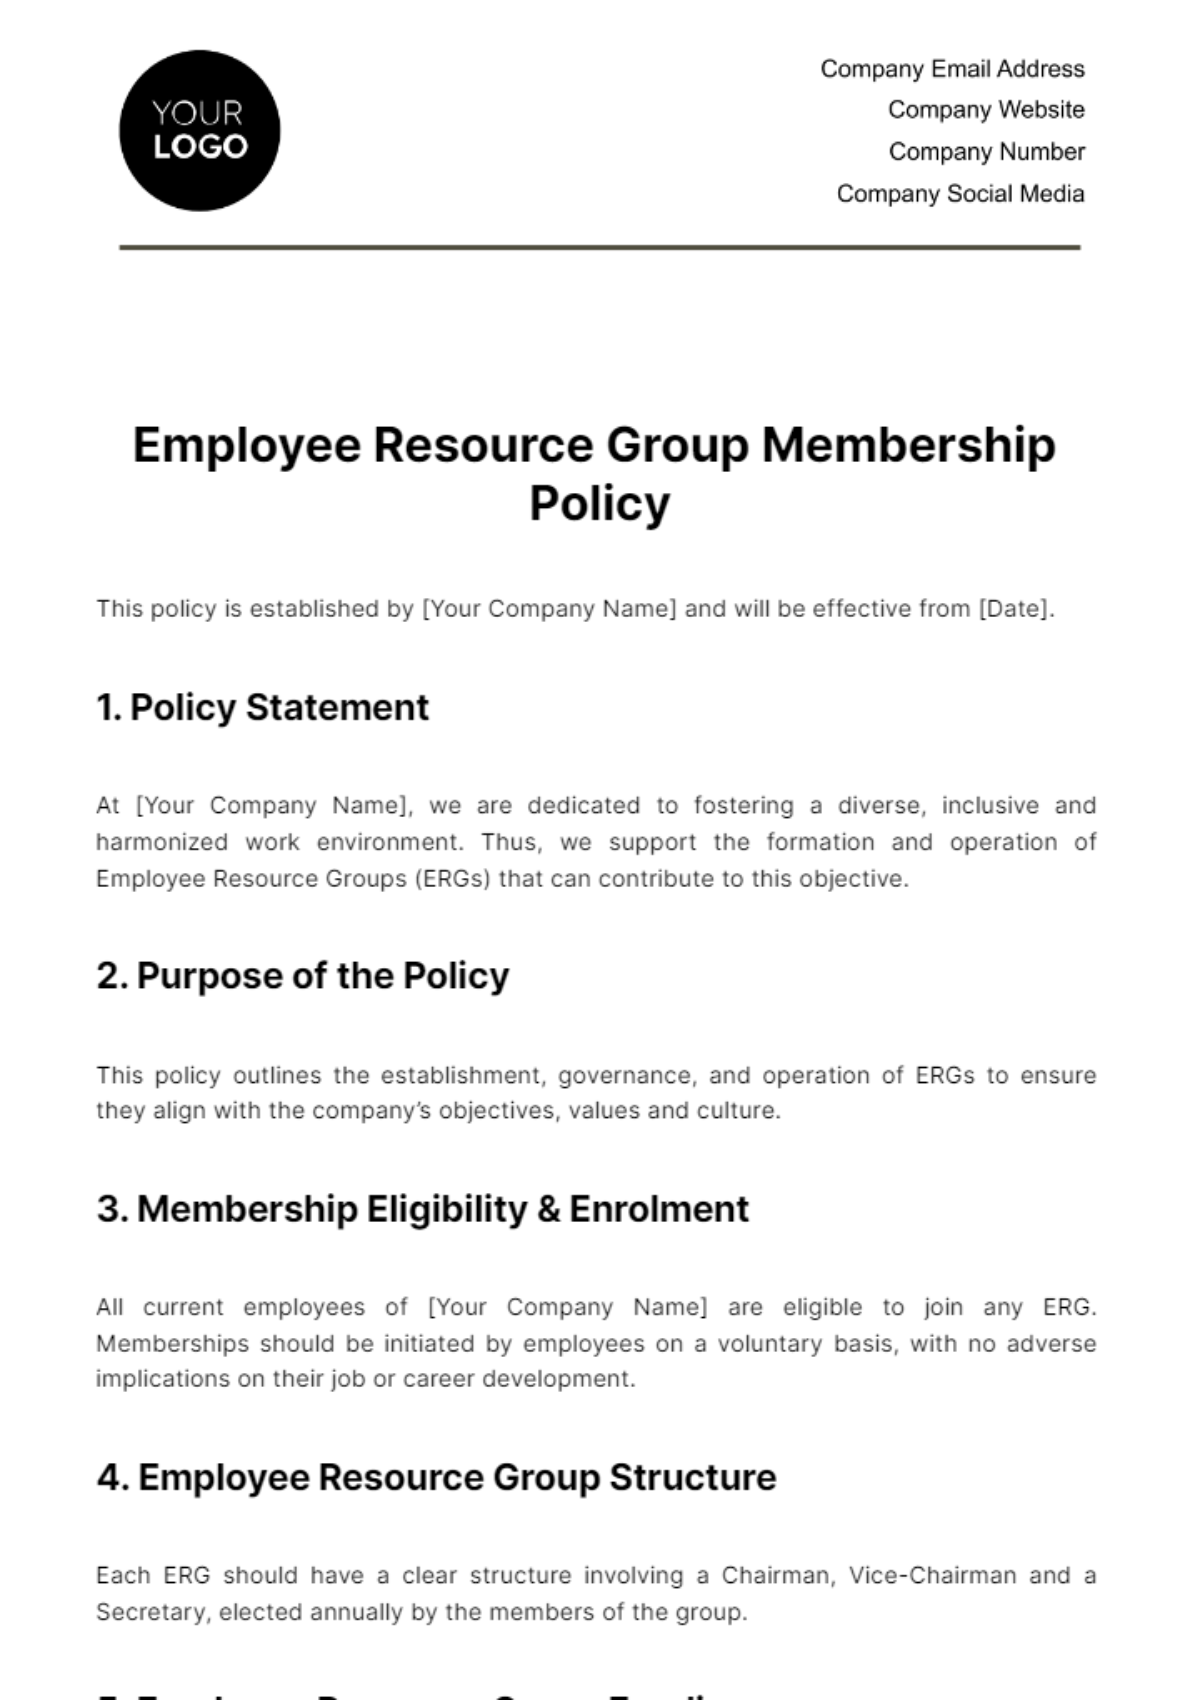 Free Employee Resource Group Membership Policy HR Template